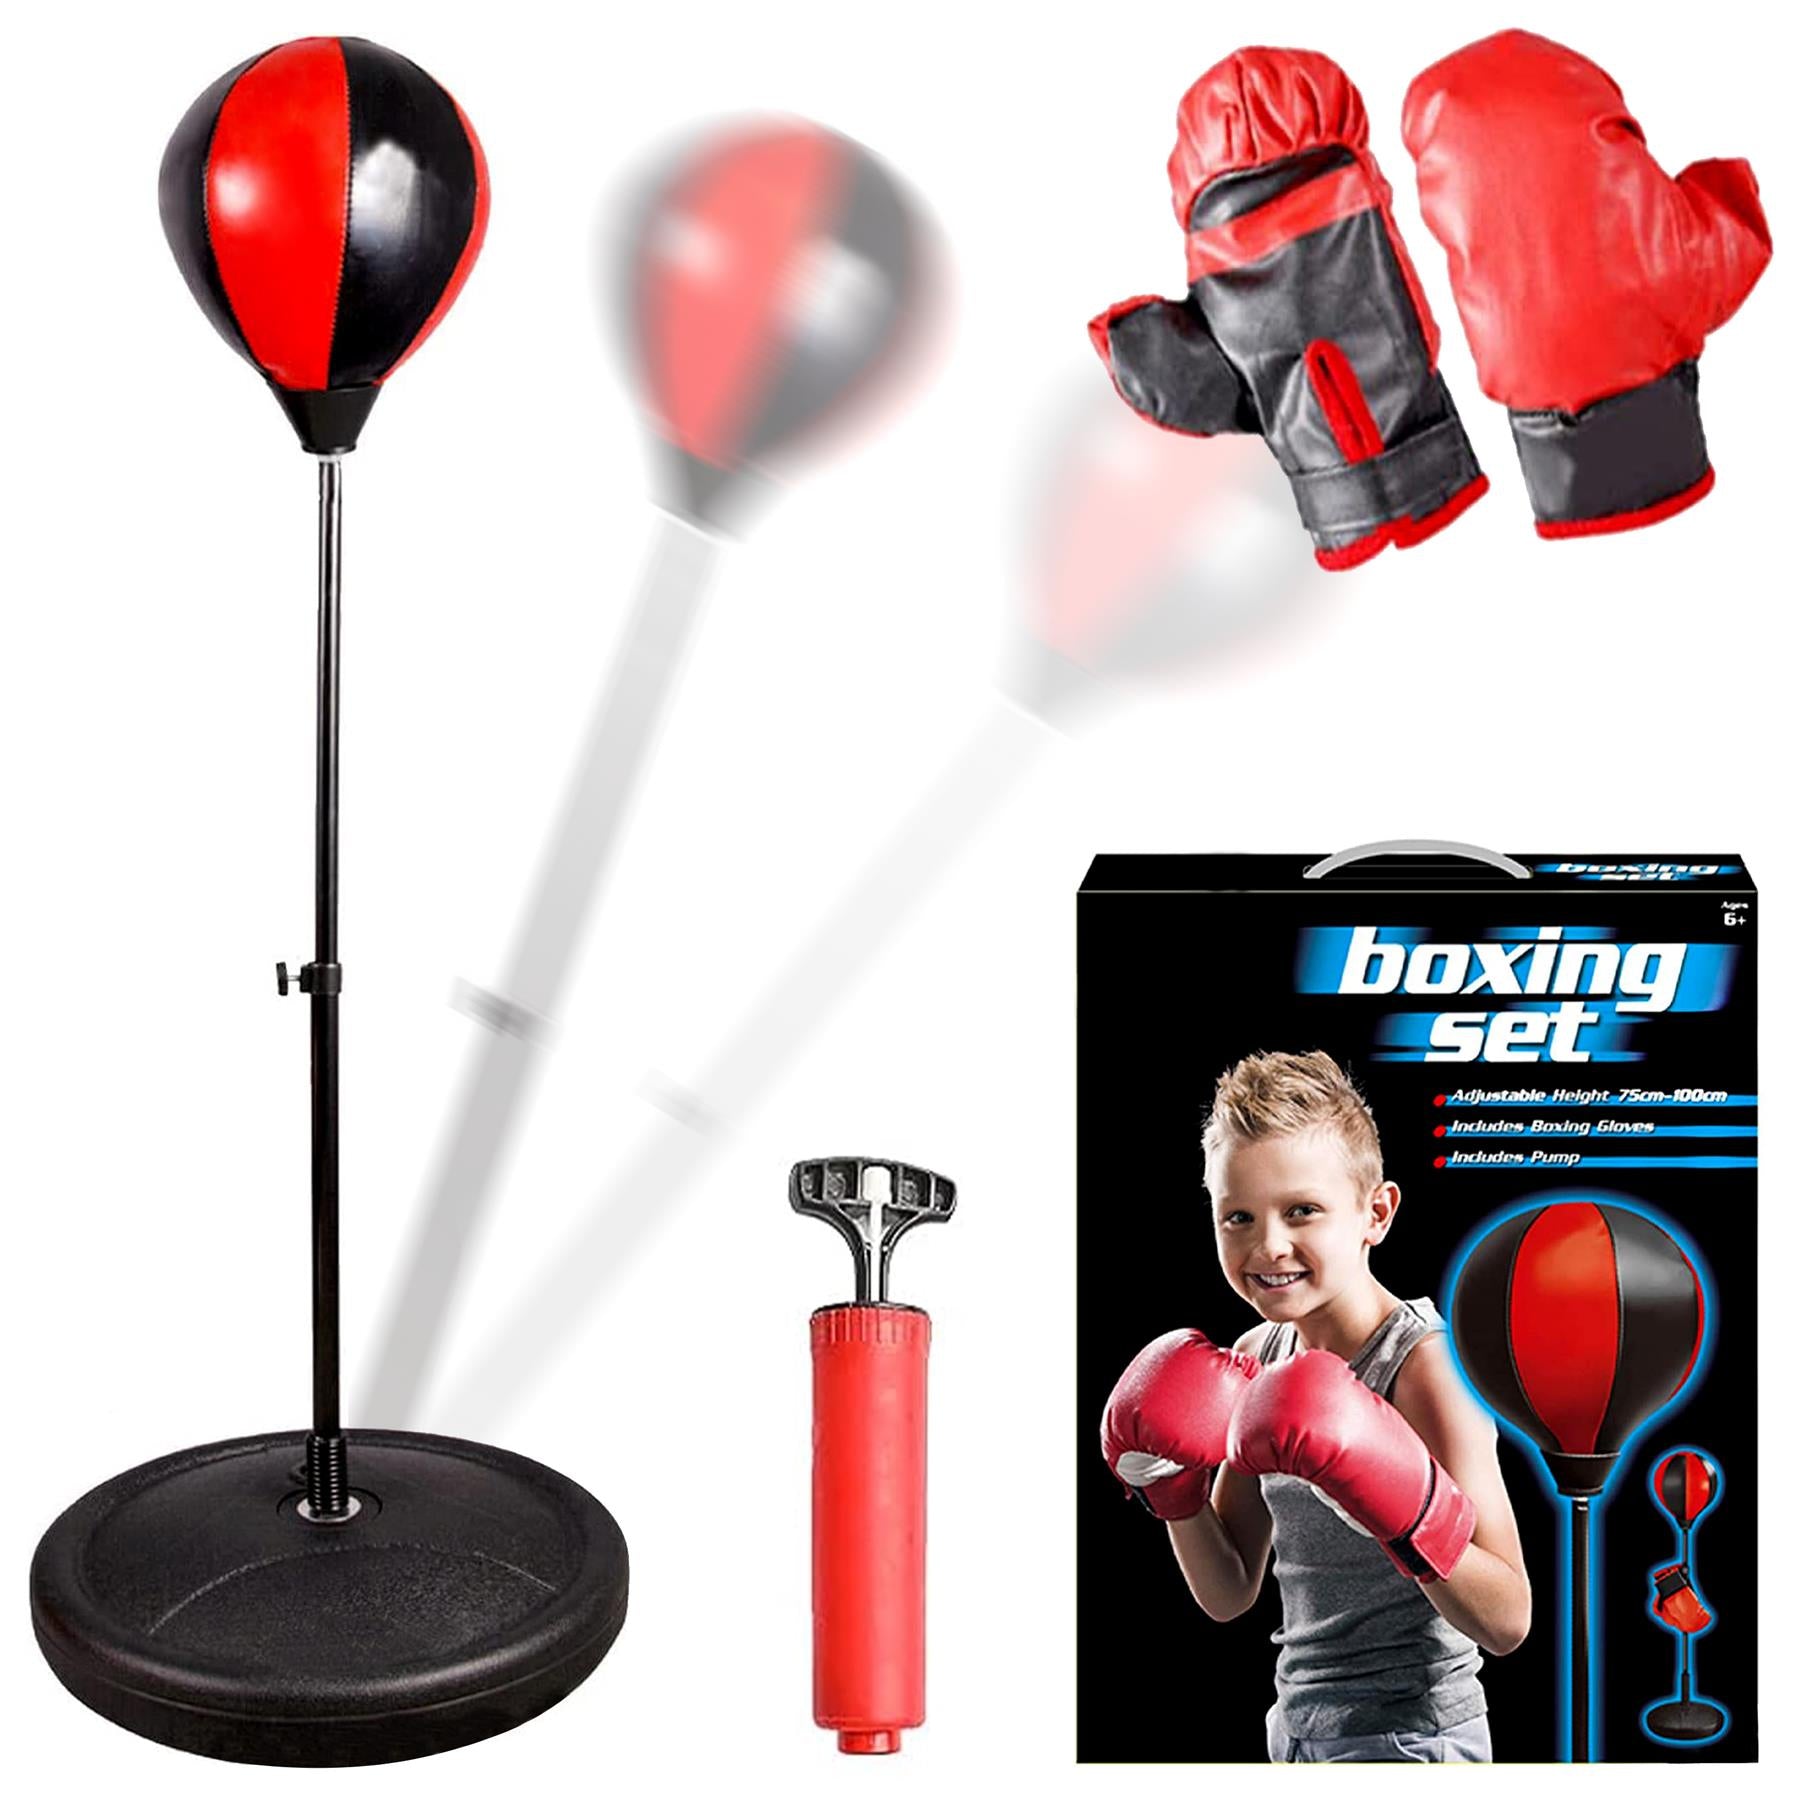 Freestanding Boxing Set Punch Ball Bag with Gloves by The Magic Toy Shop - The Magic Toy Shop